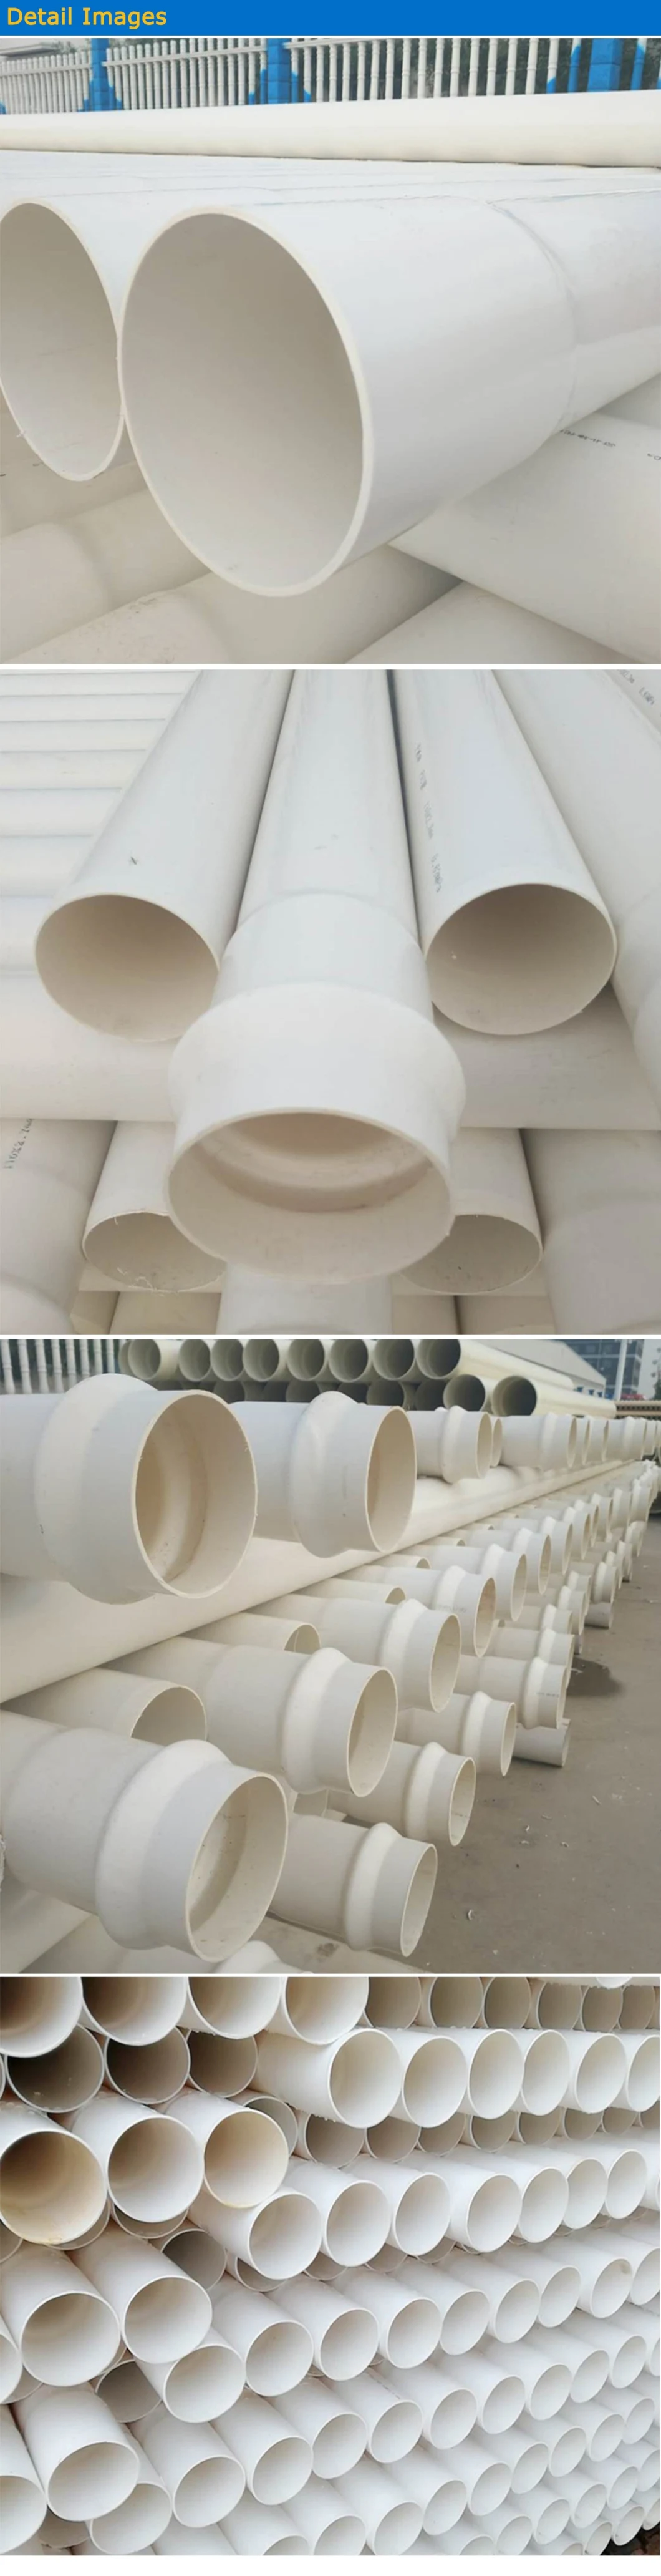 10 Inch 180mm Diameter Colored PVC Drainage Pipe Size